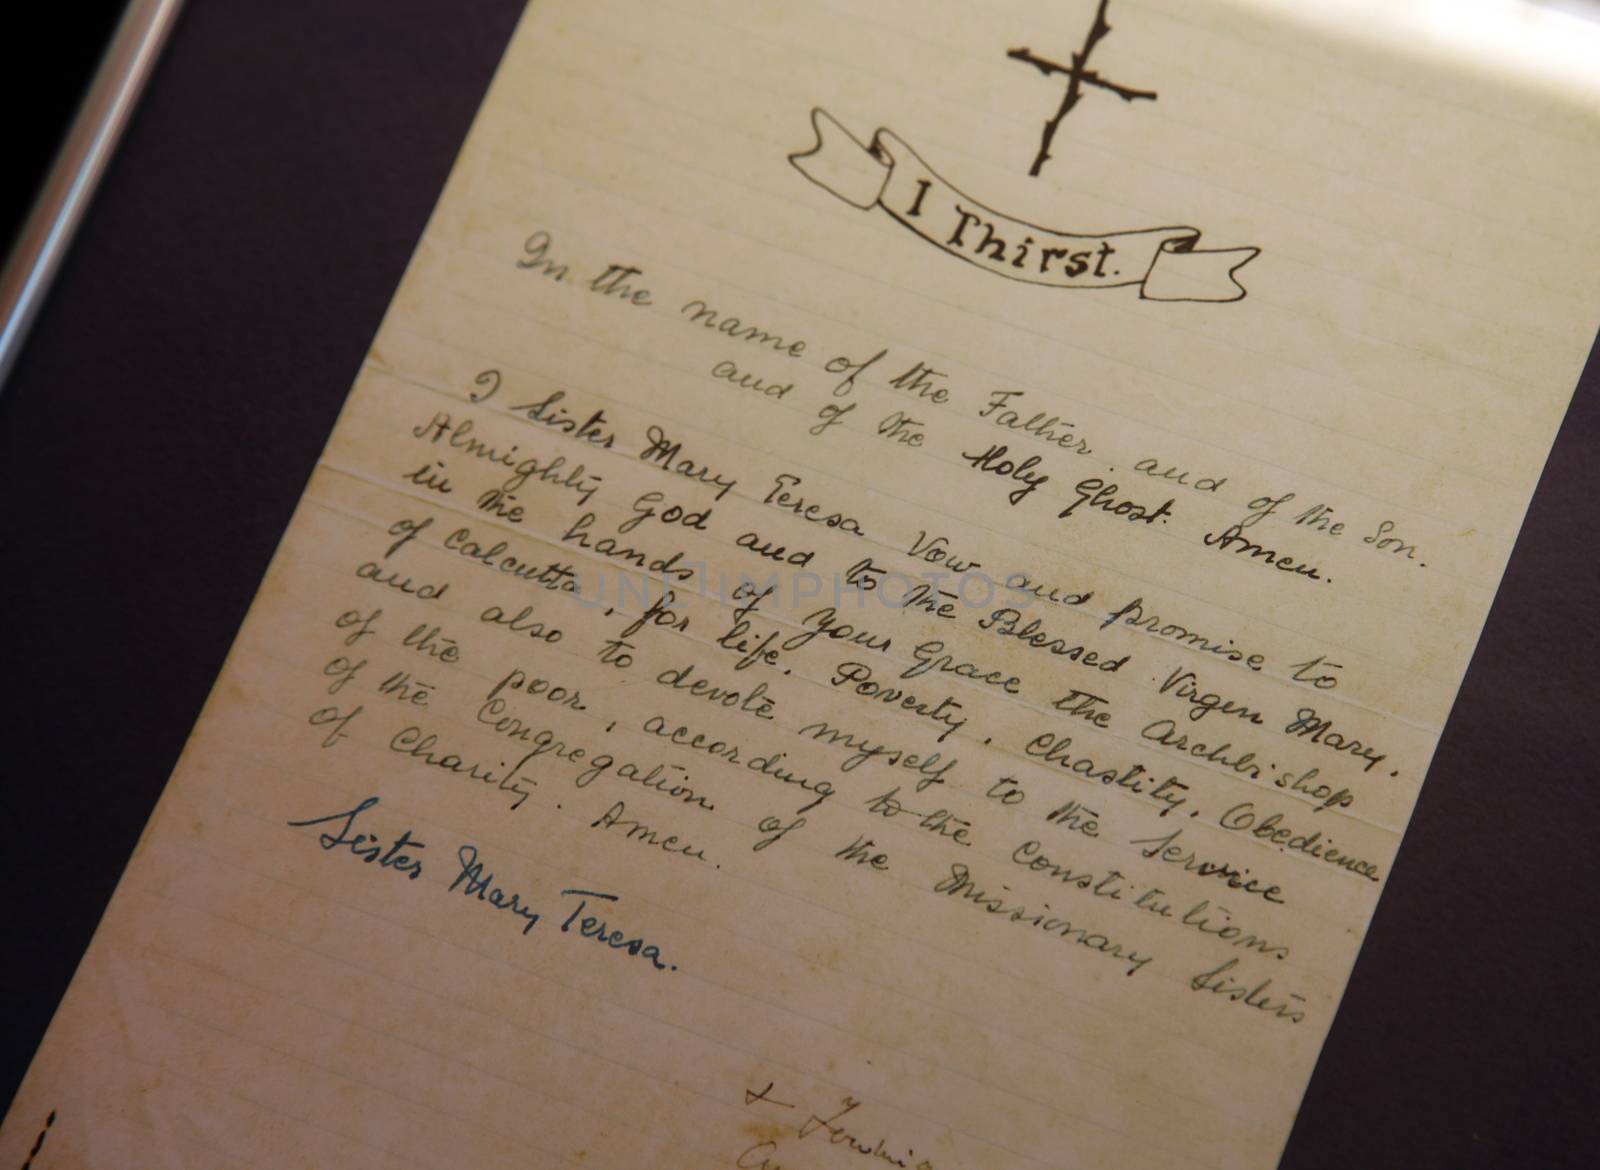 Vows of Mother Teresa written in her hand by atlas